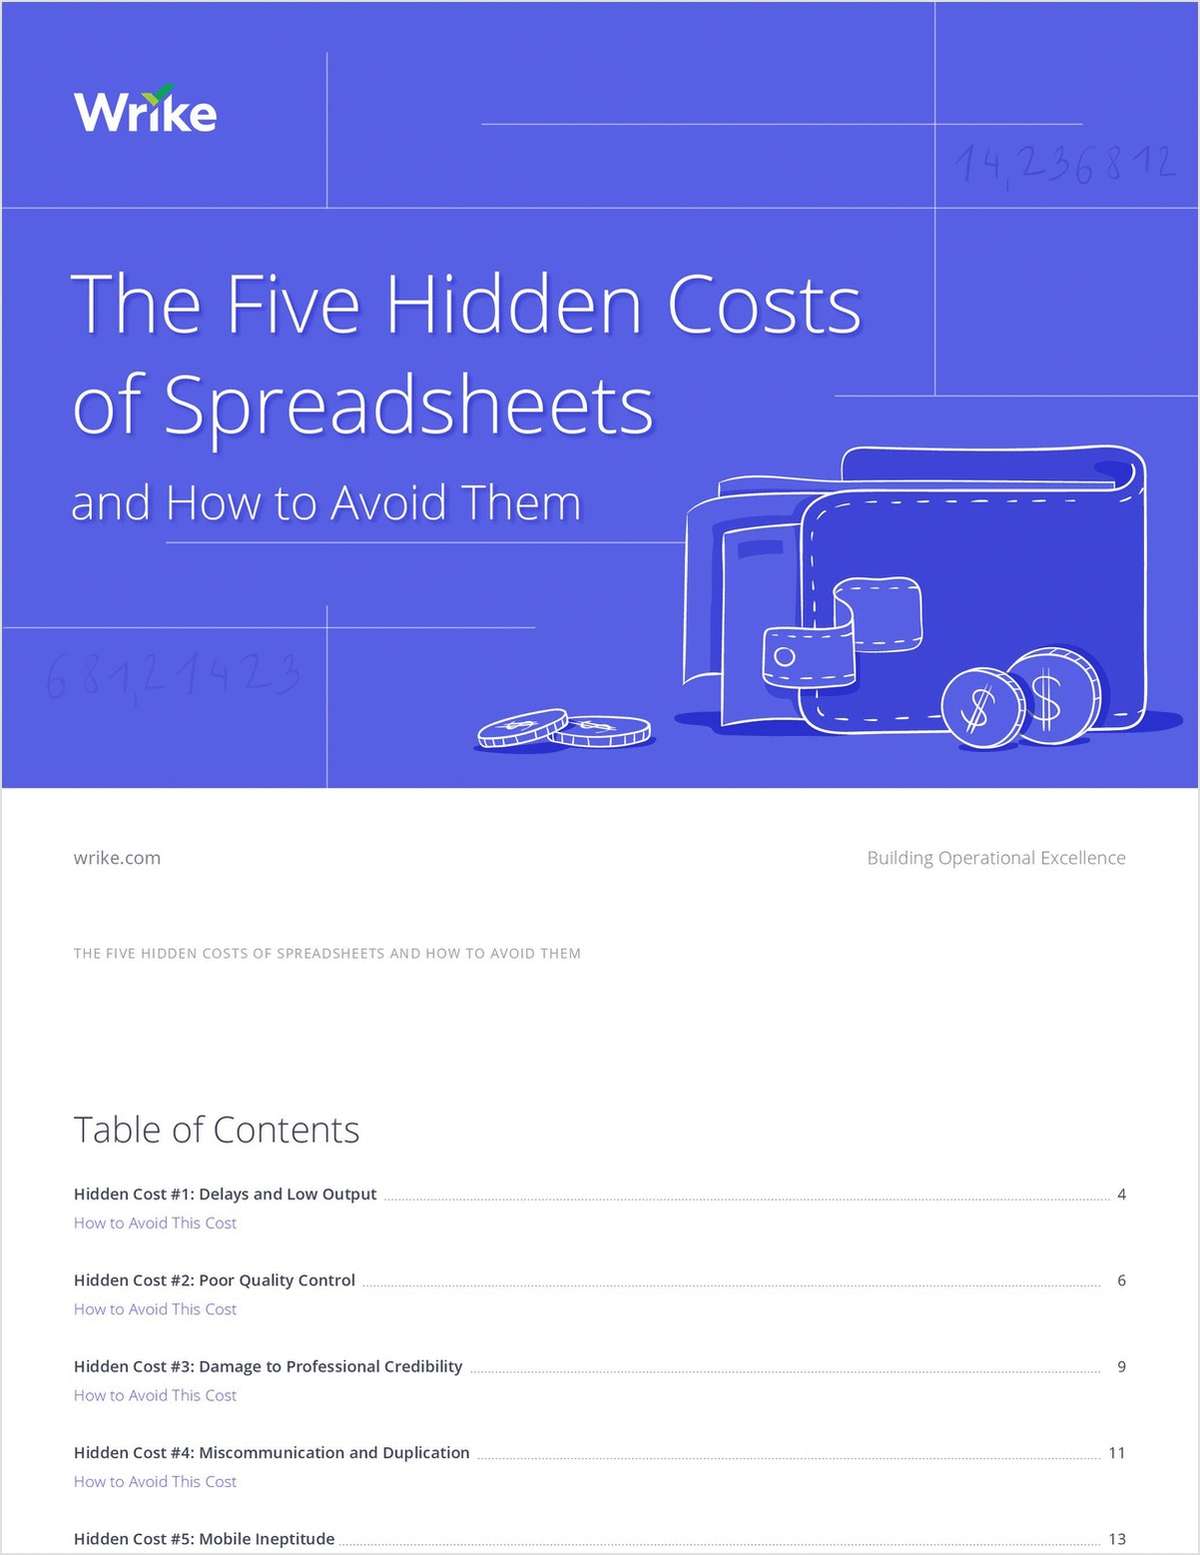 Five Hidden Costs of Spreadsheets and How to Avoid Them